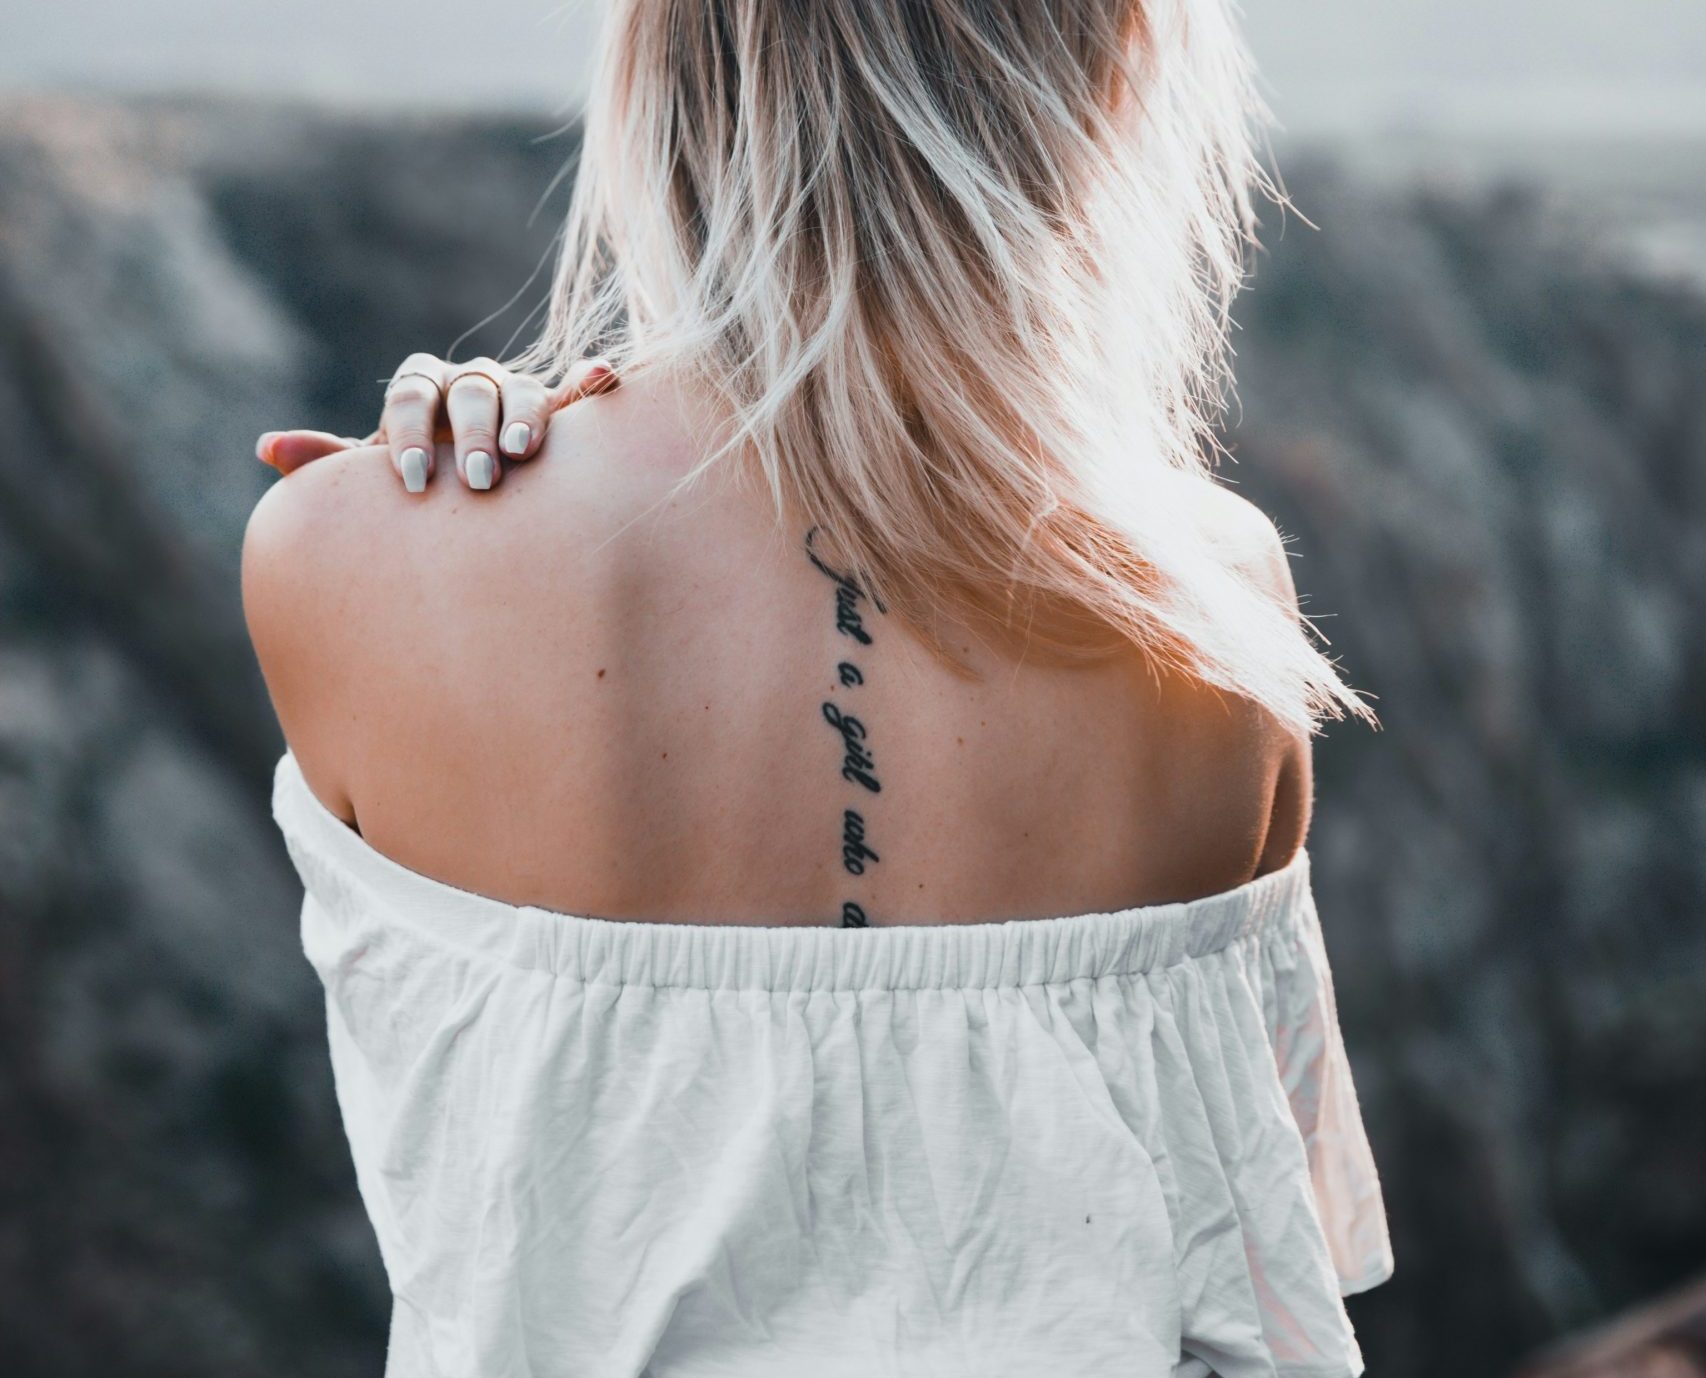 NUBWAY | The Healthiest Tattoo Removal Methods for Better Health Outcomes